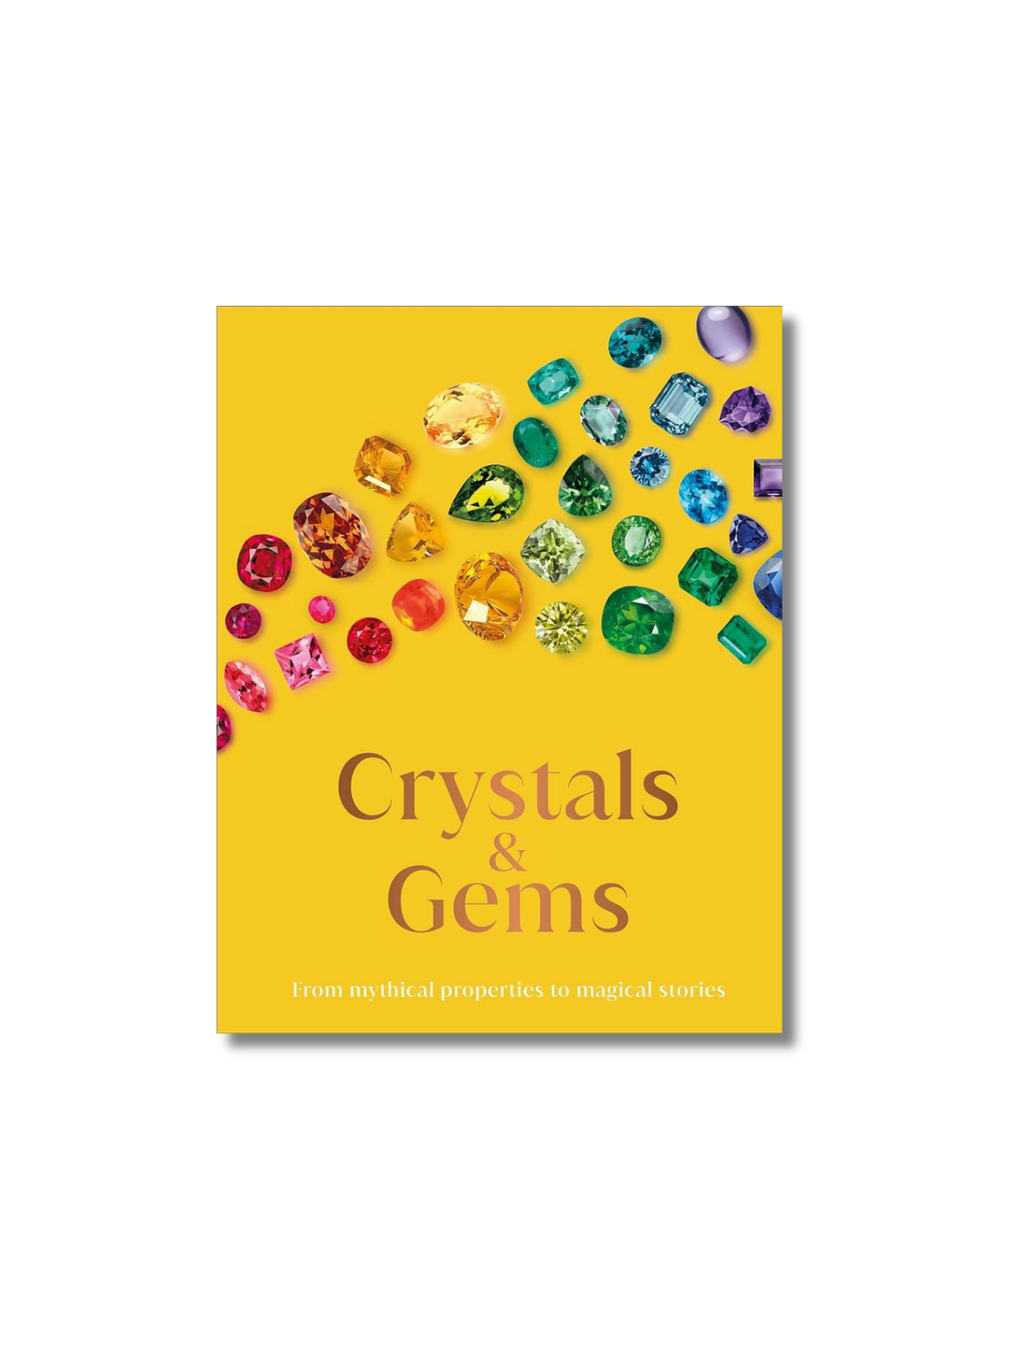 The Crystal and Gems: From Mythical Properties to Magical Stories